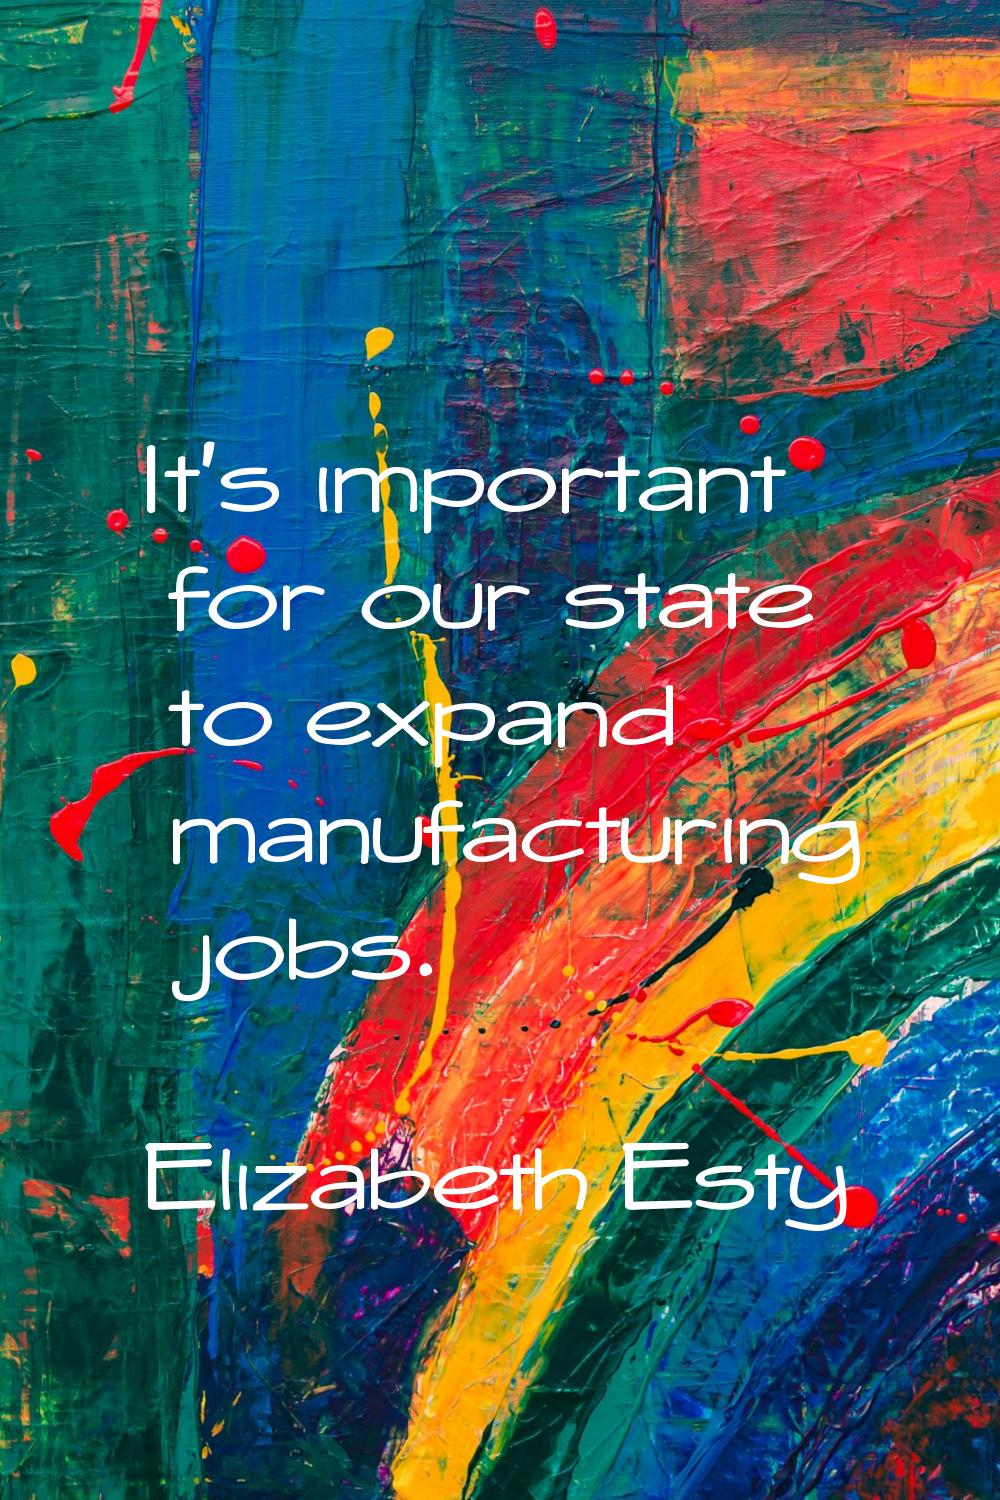 It's important for our state to expand manufacturing jobs.